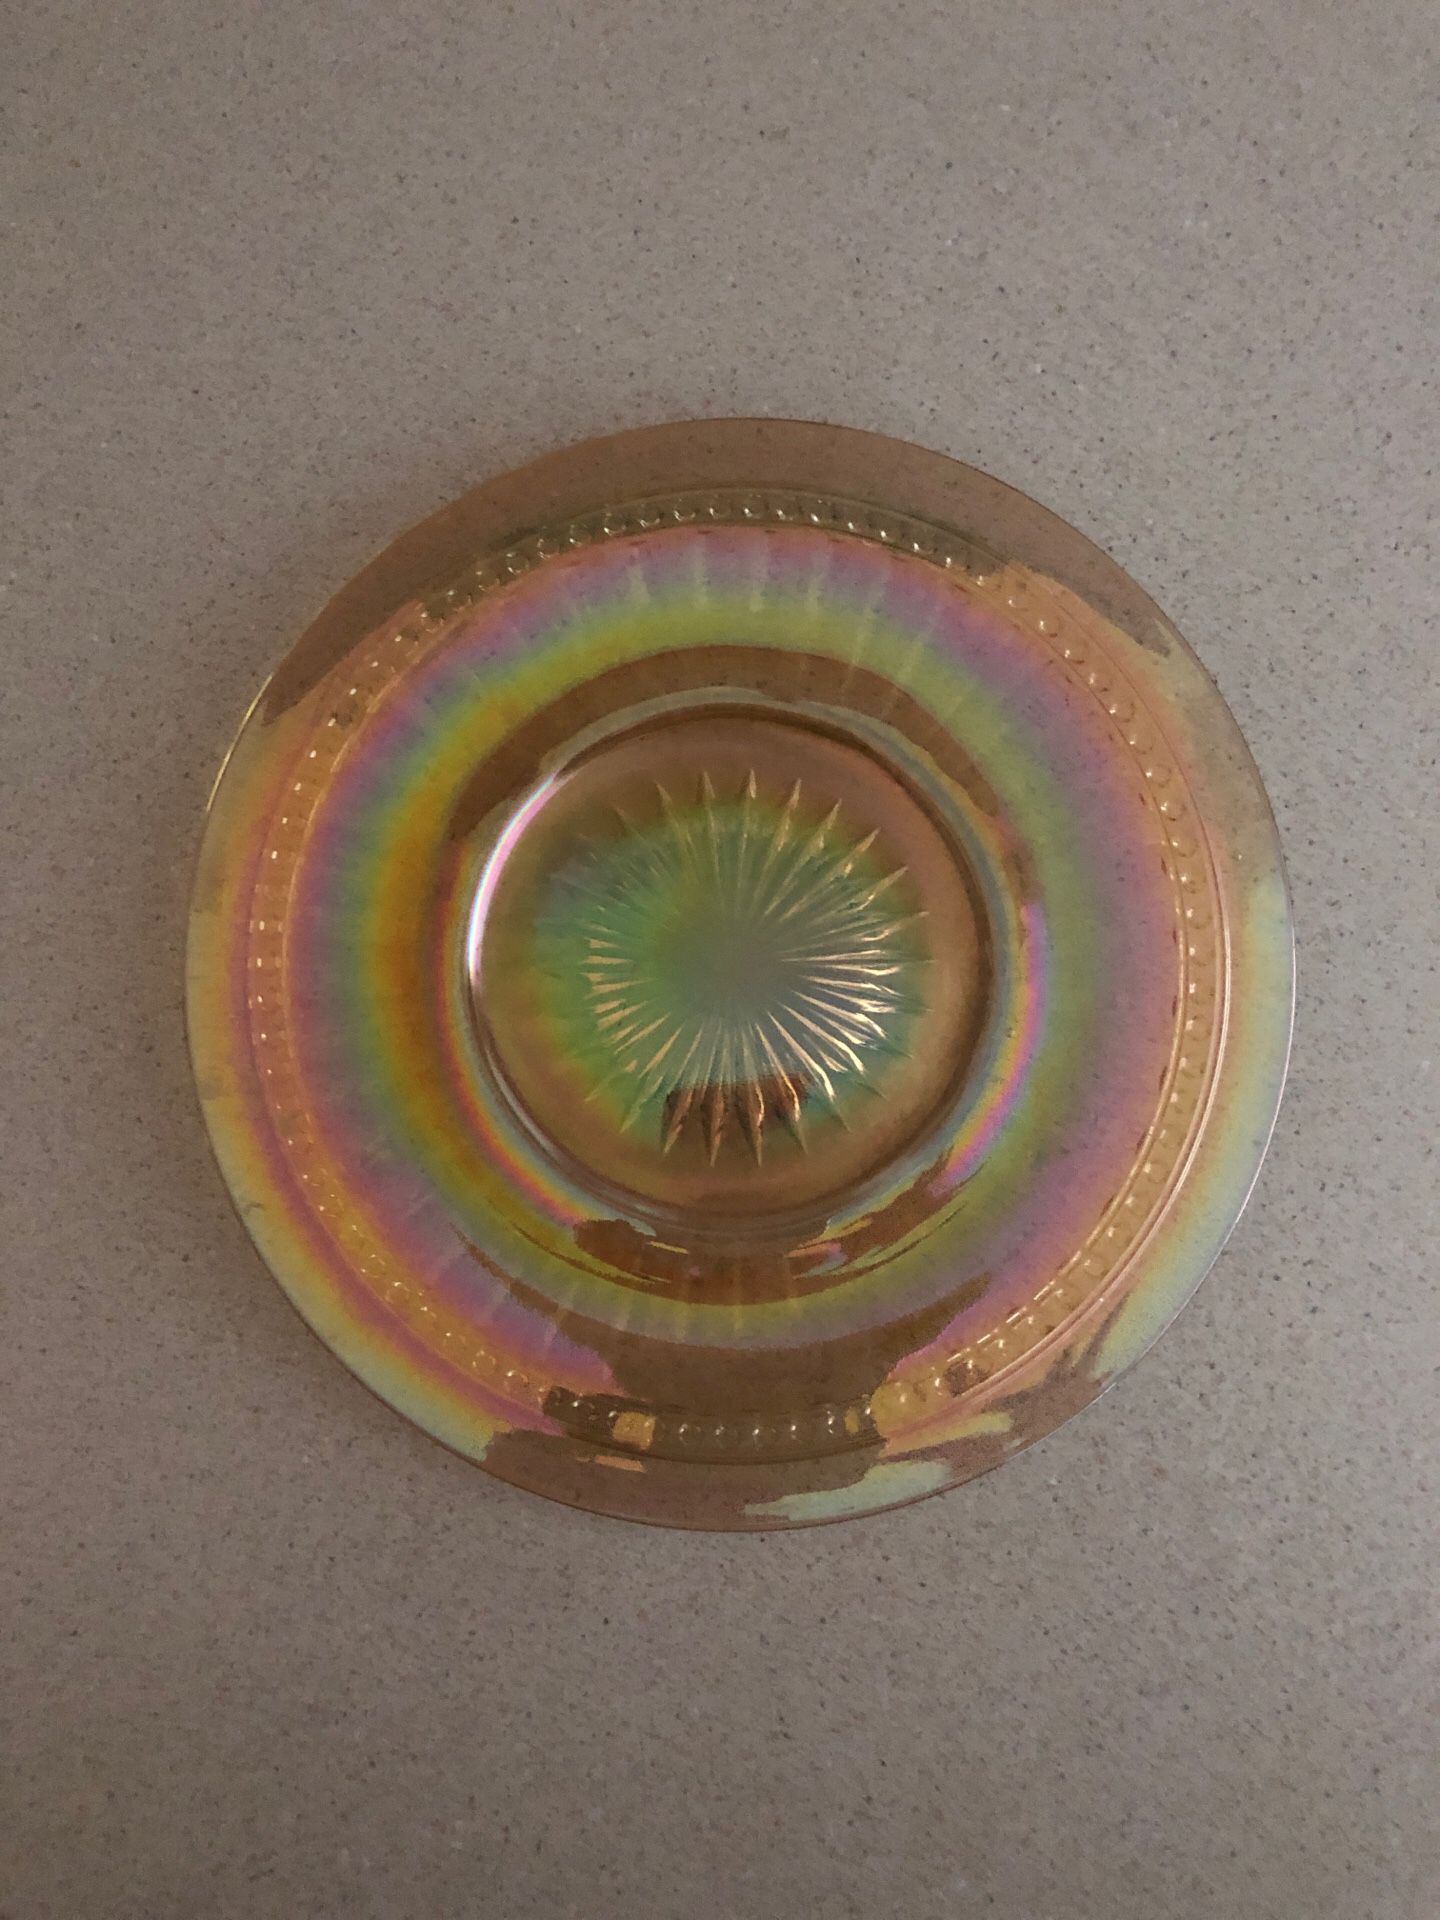 Carnival Glass plates - collectible antique